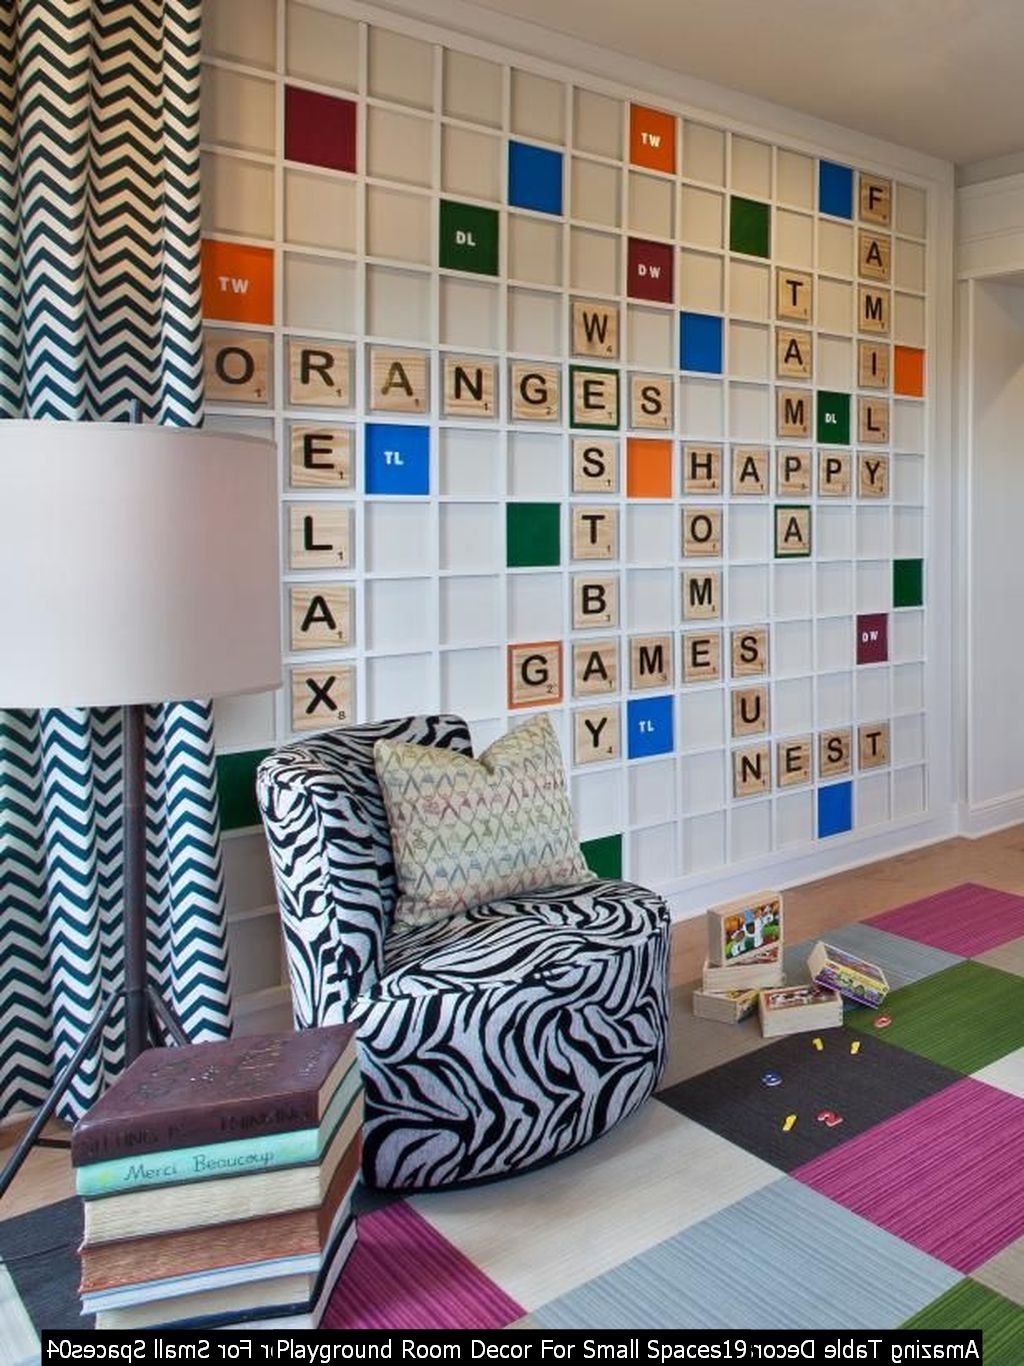 Playground Room Decor For Small Spaces19